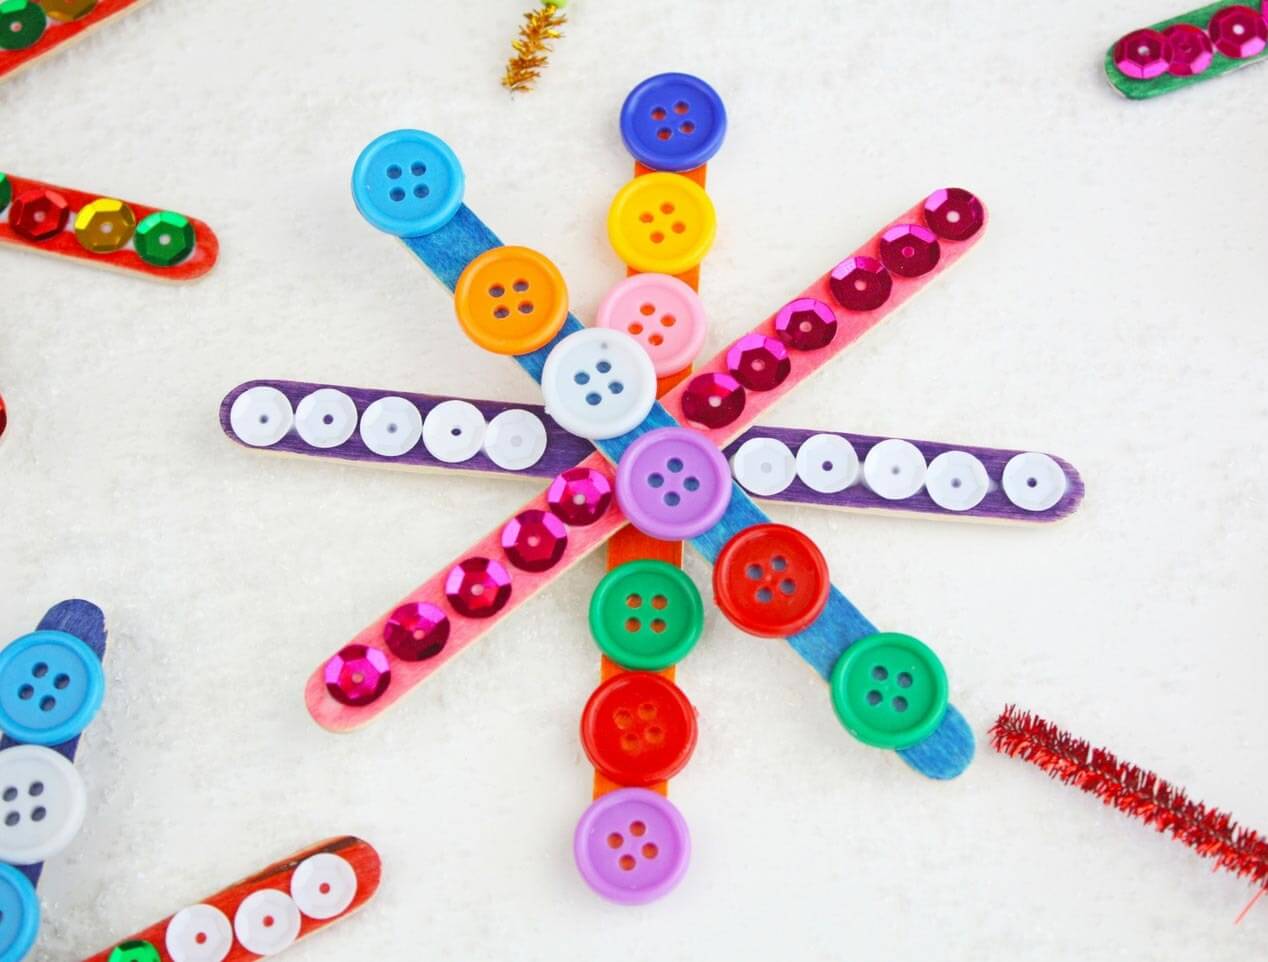 Pretty Snowflake Decoration Craft With Buttons, Popsicle Sticks & Beads Snowflake Button Craft Using popsicle stick